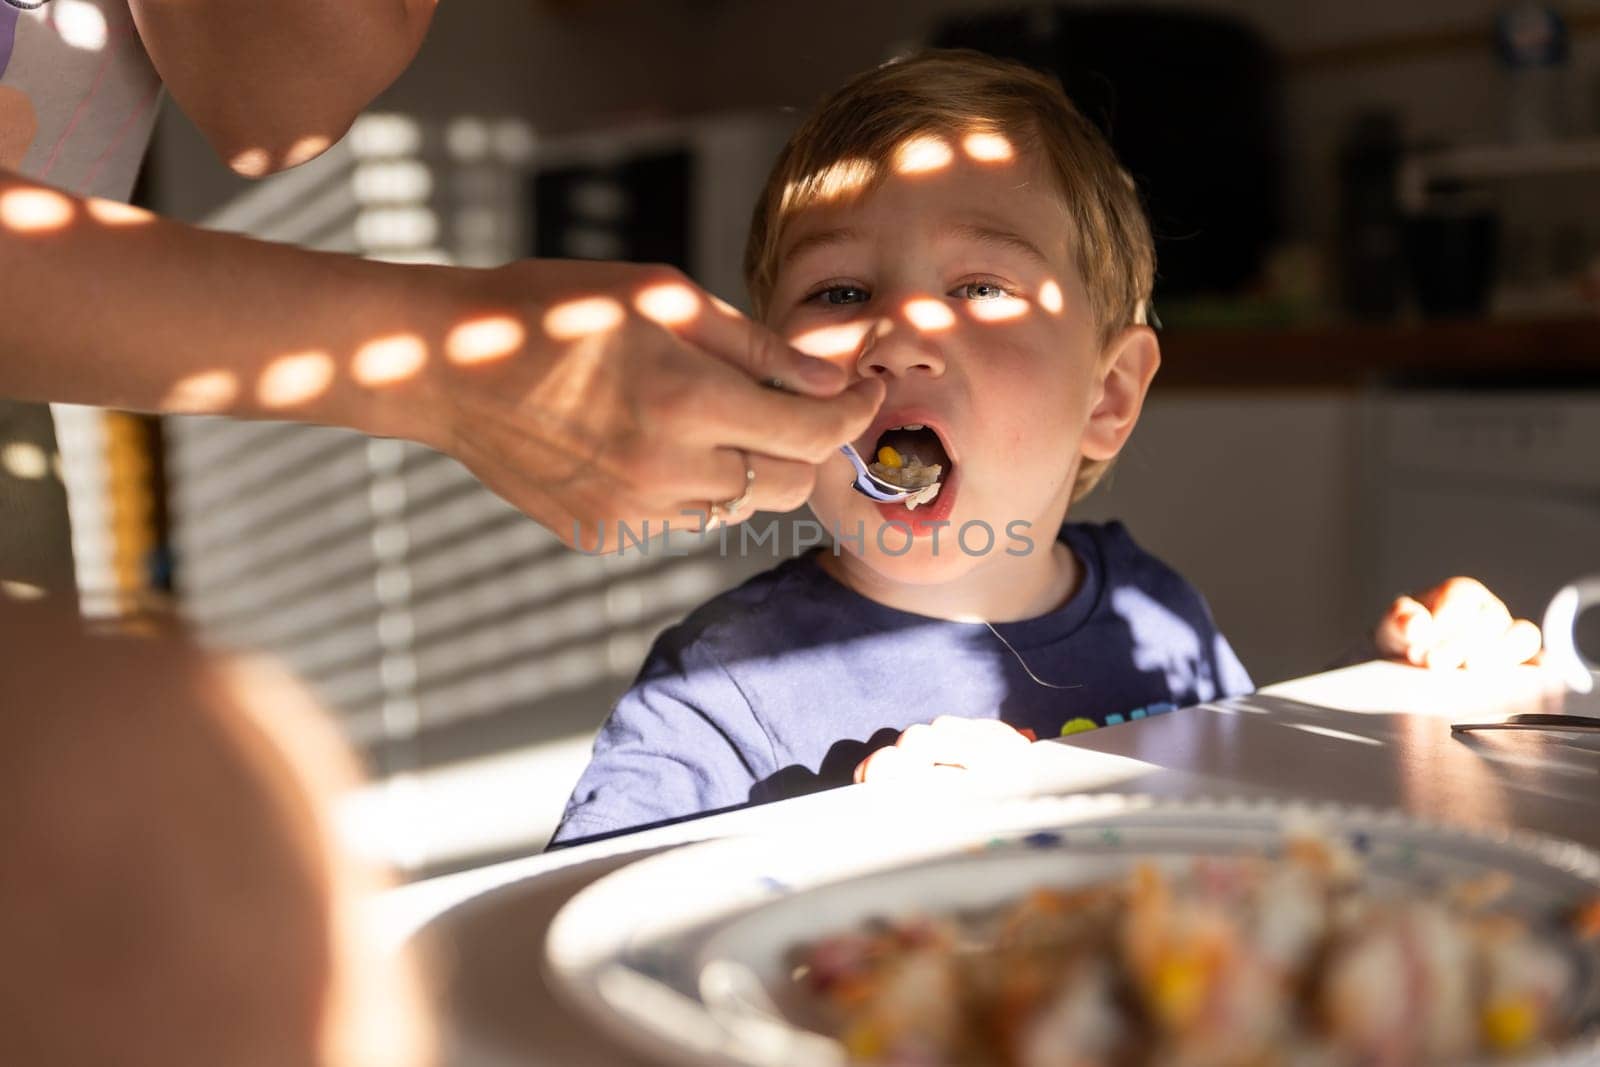 Mom feeds a boy with a spoon in the kitchen by Studia72